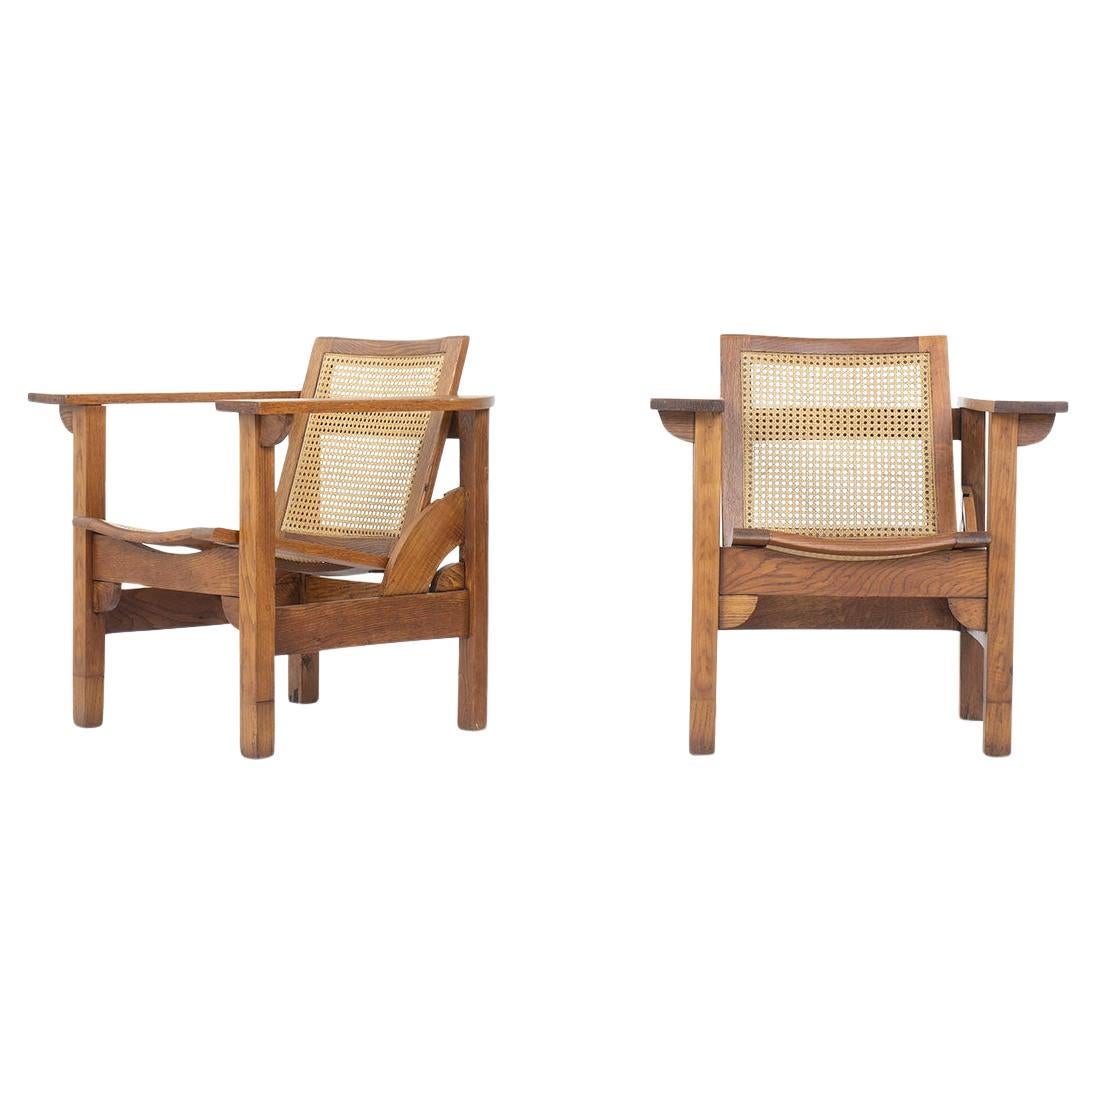 Set of 2 Hendaye armchairs by Pierre Dariel in oak and caned, 1930